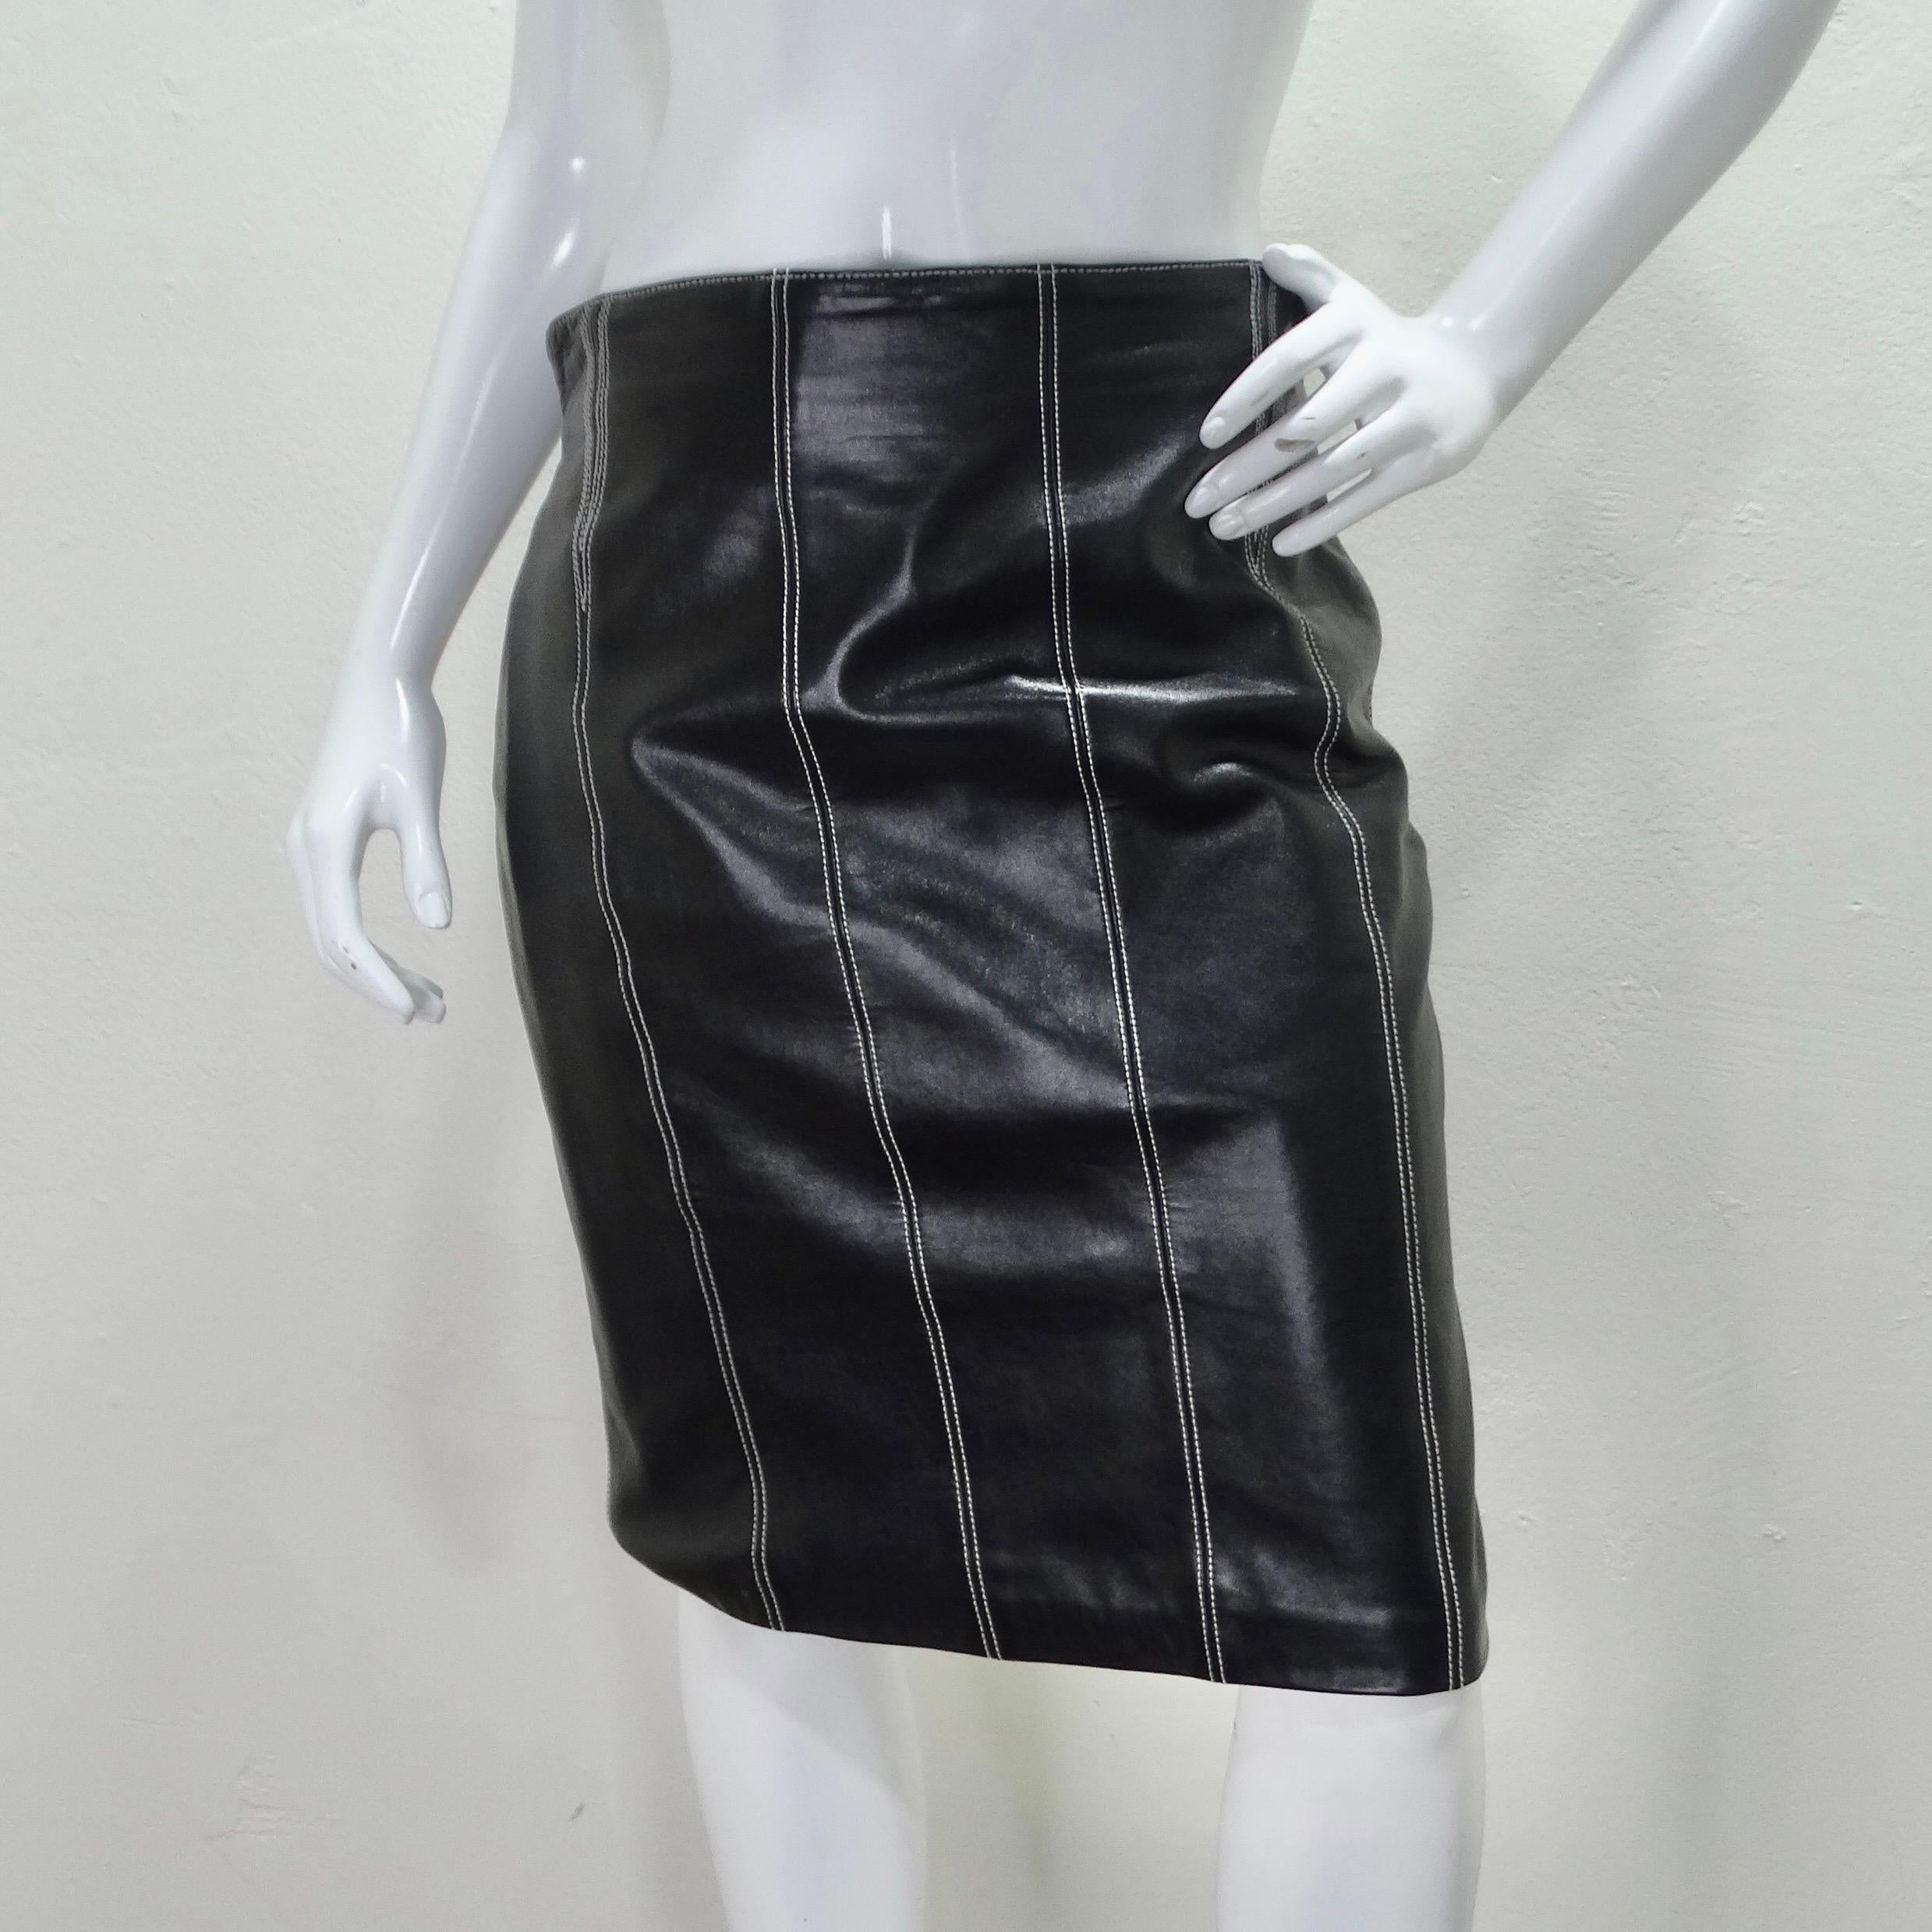 Your next go-to skirt is calling your name! This 1990s Escada pencil skirt is so classic and versatile. Classic mid length pencil skirt is compromised of a soft black leather with contrasting decorative white stitching. Featuring a full lining and